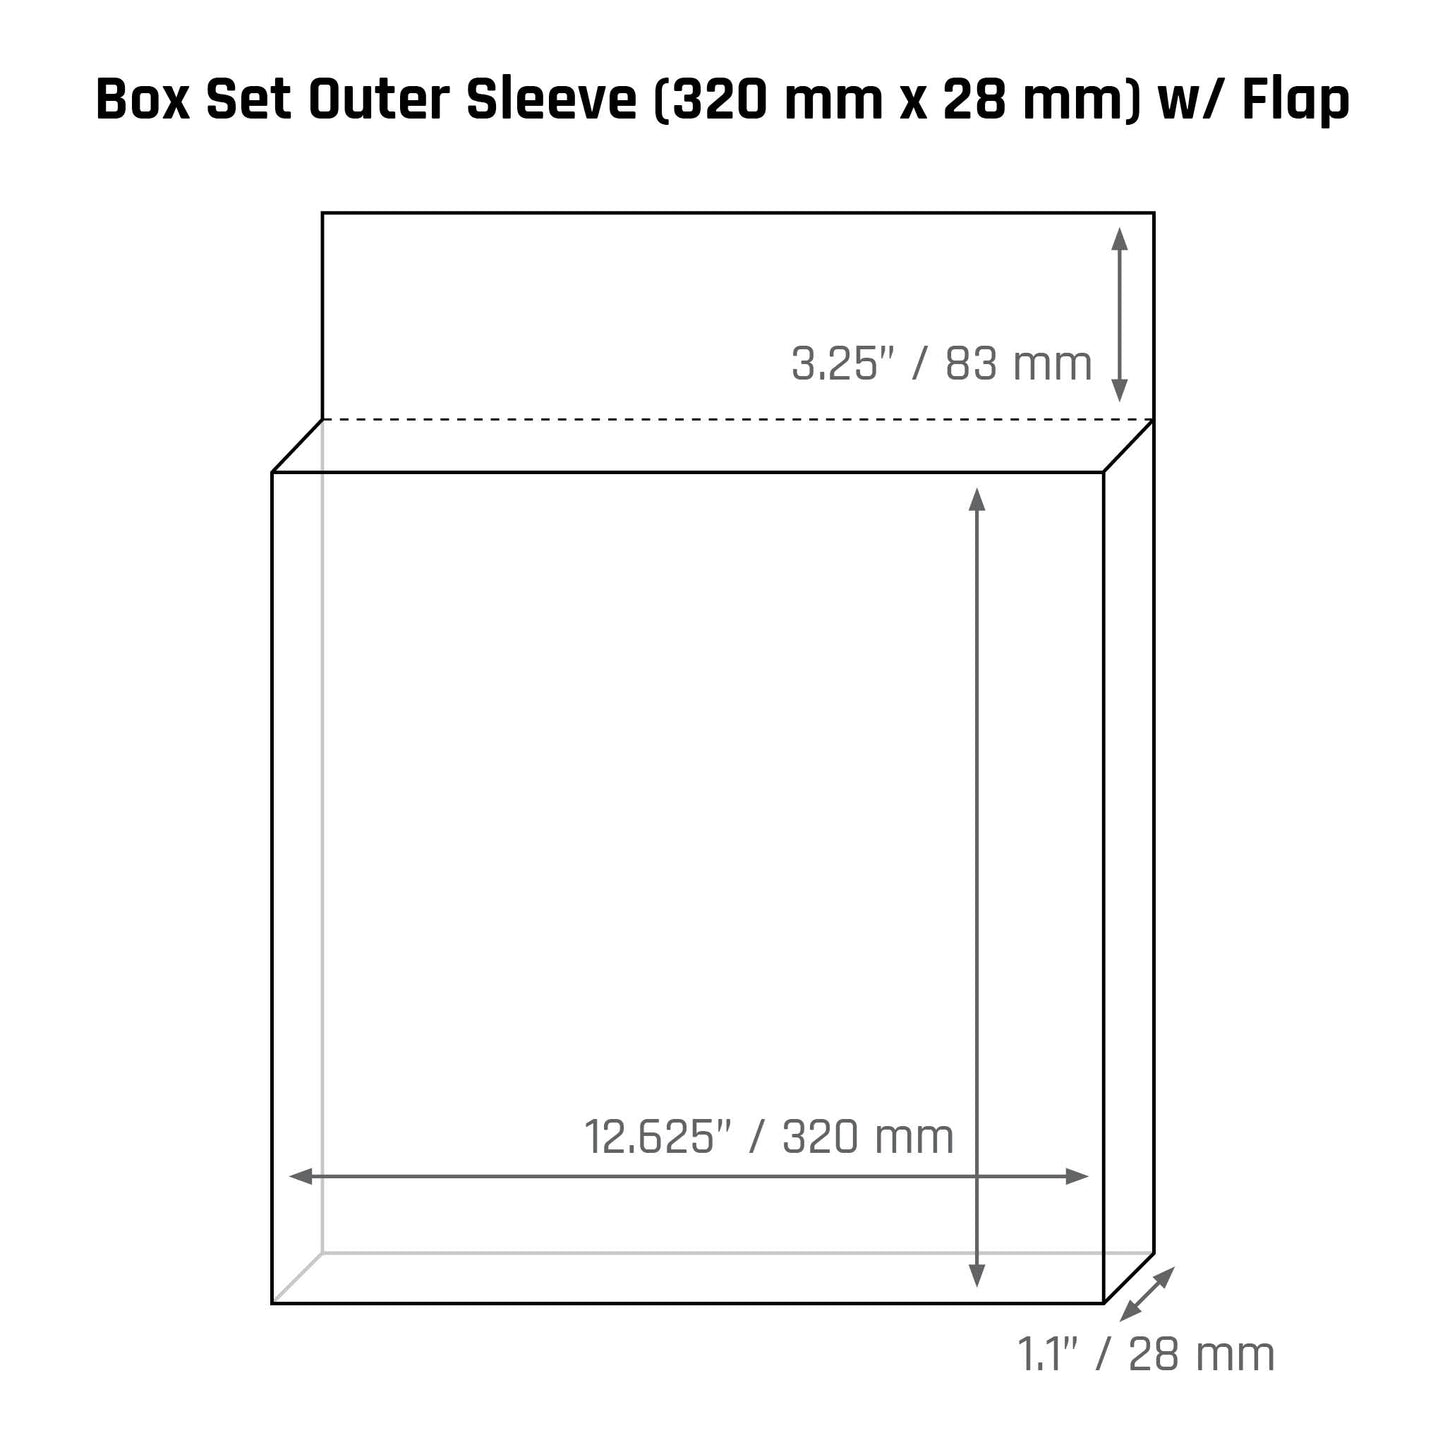 Box Set Outer Sleeve (320 mm x 28 mm) - 3mil - Vinyl Storage Solutions